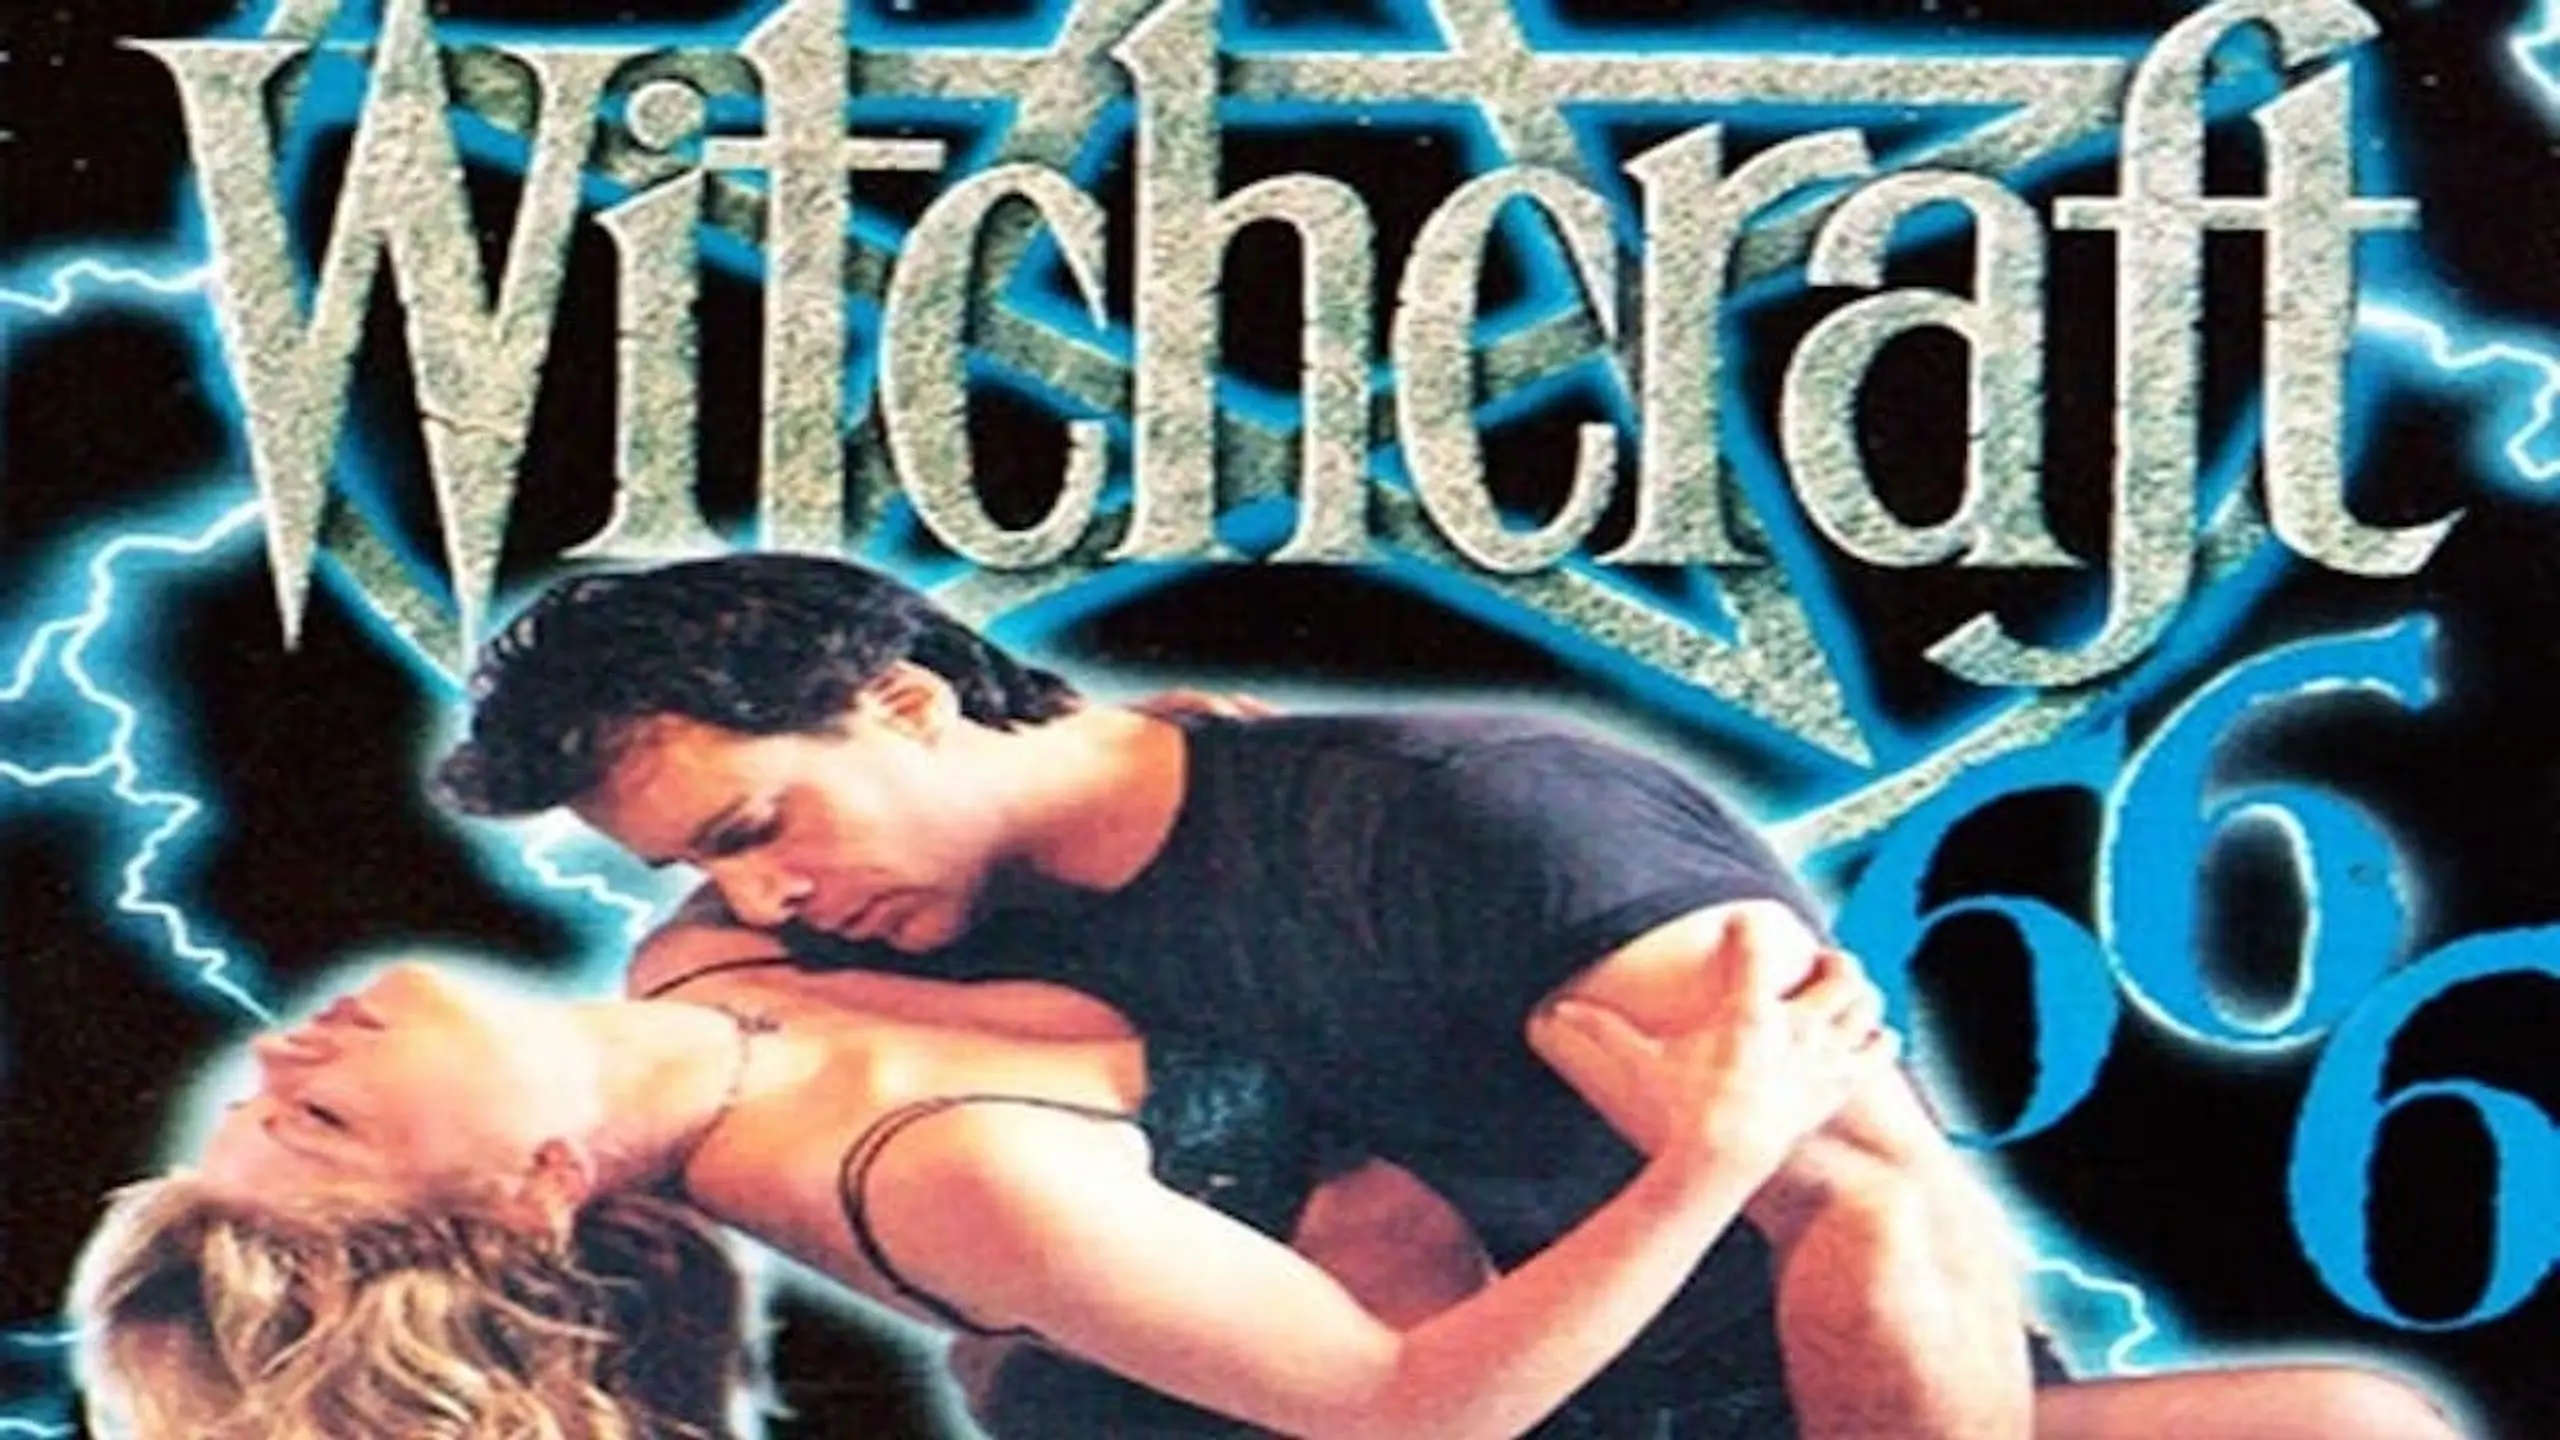 Witchcraft 666: The Devil's Mistress